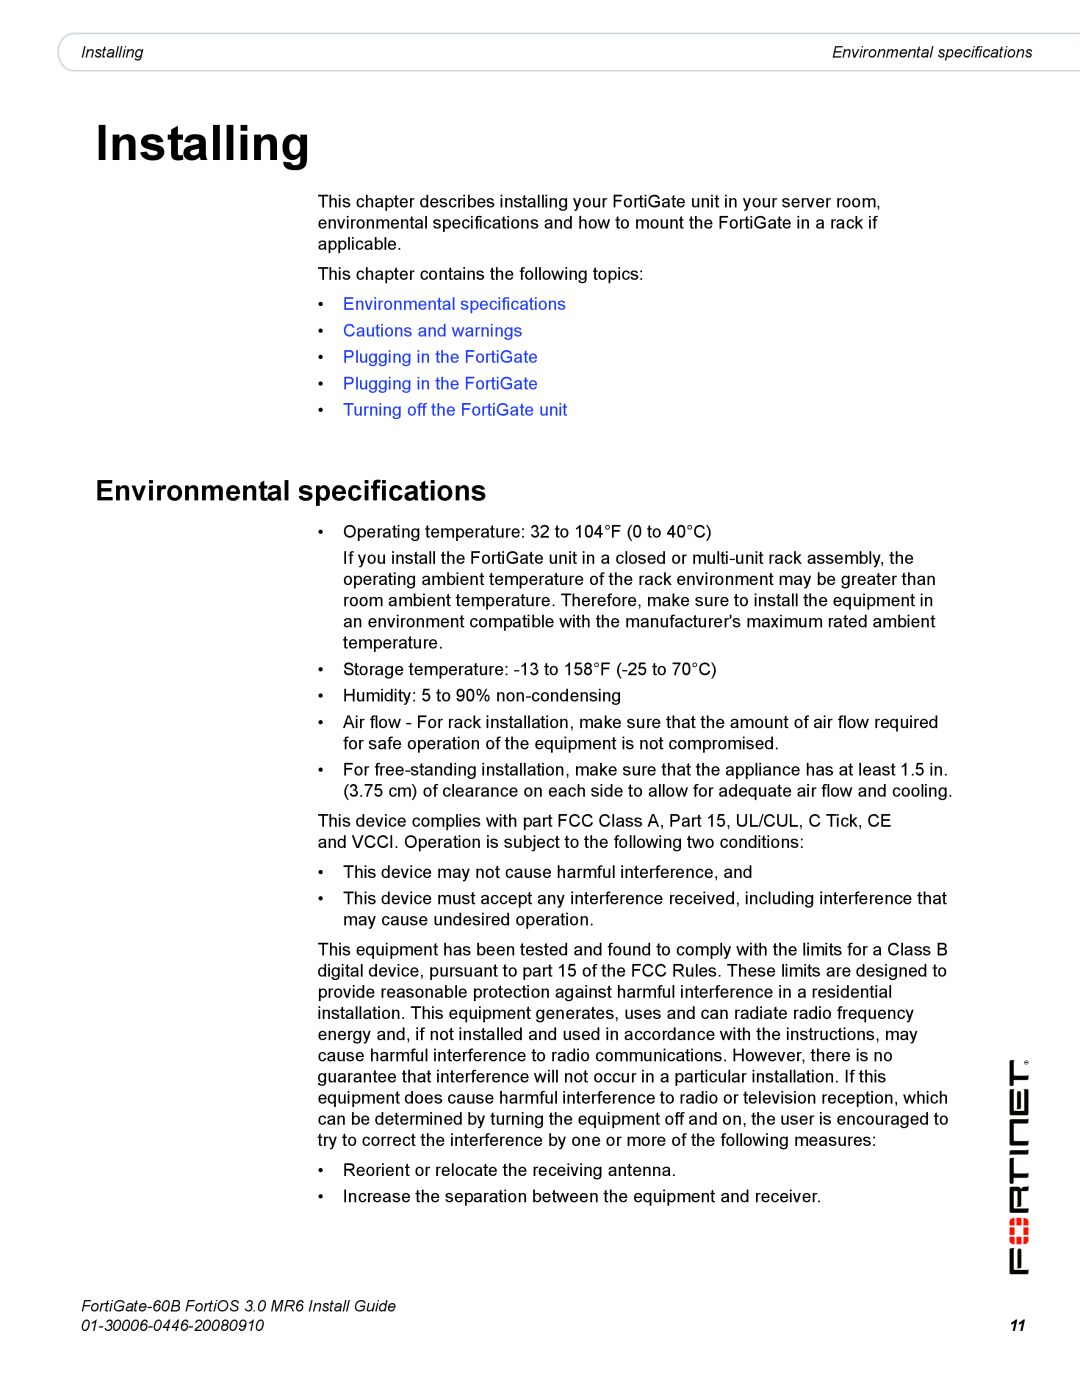 Fortinet 60B manual Installing, Environmental specifications Cautions and warnings, Turning off the FortiGate unit 